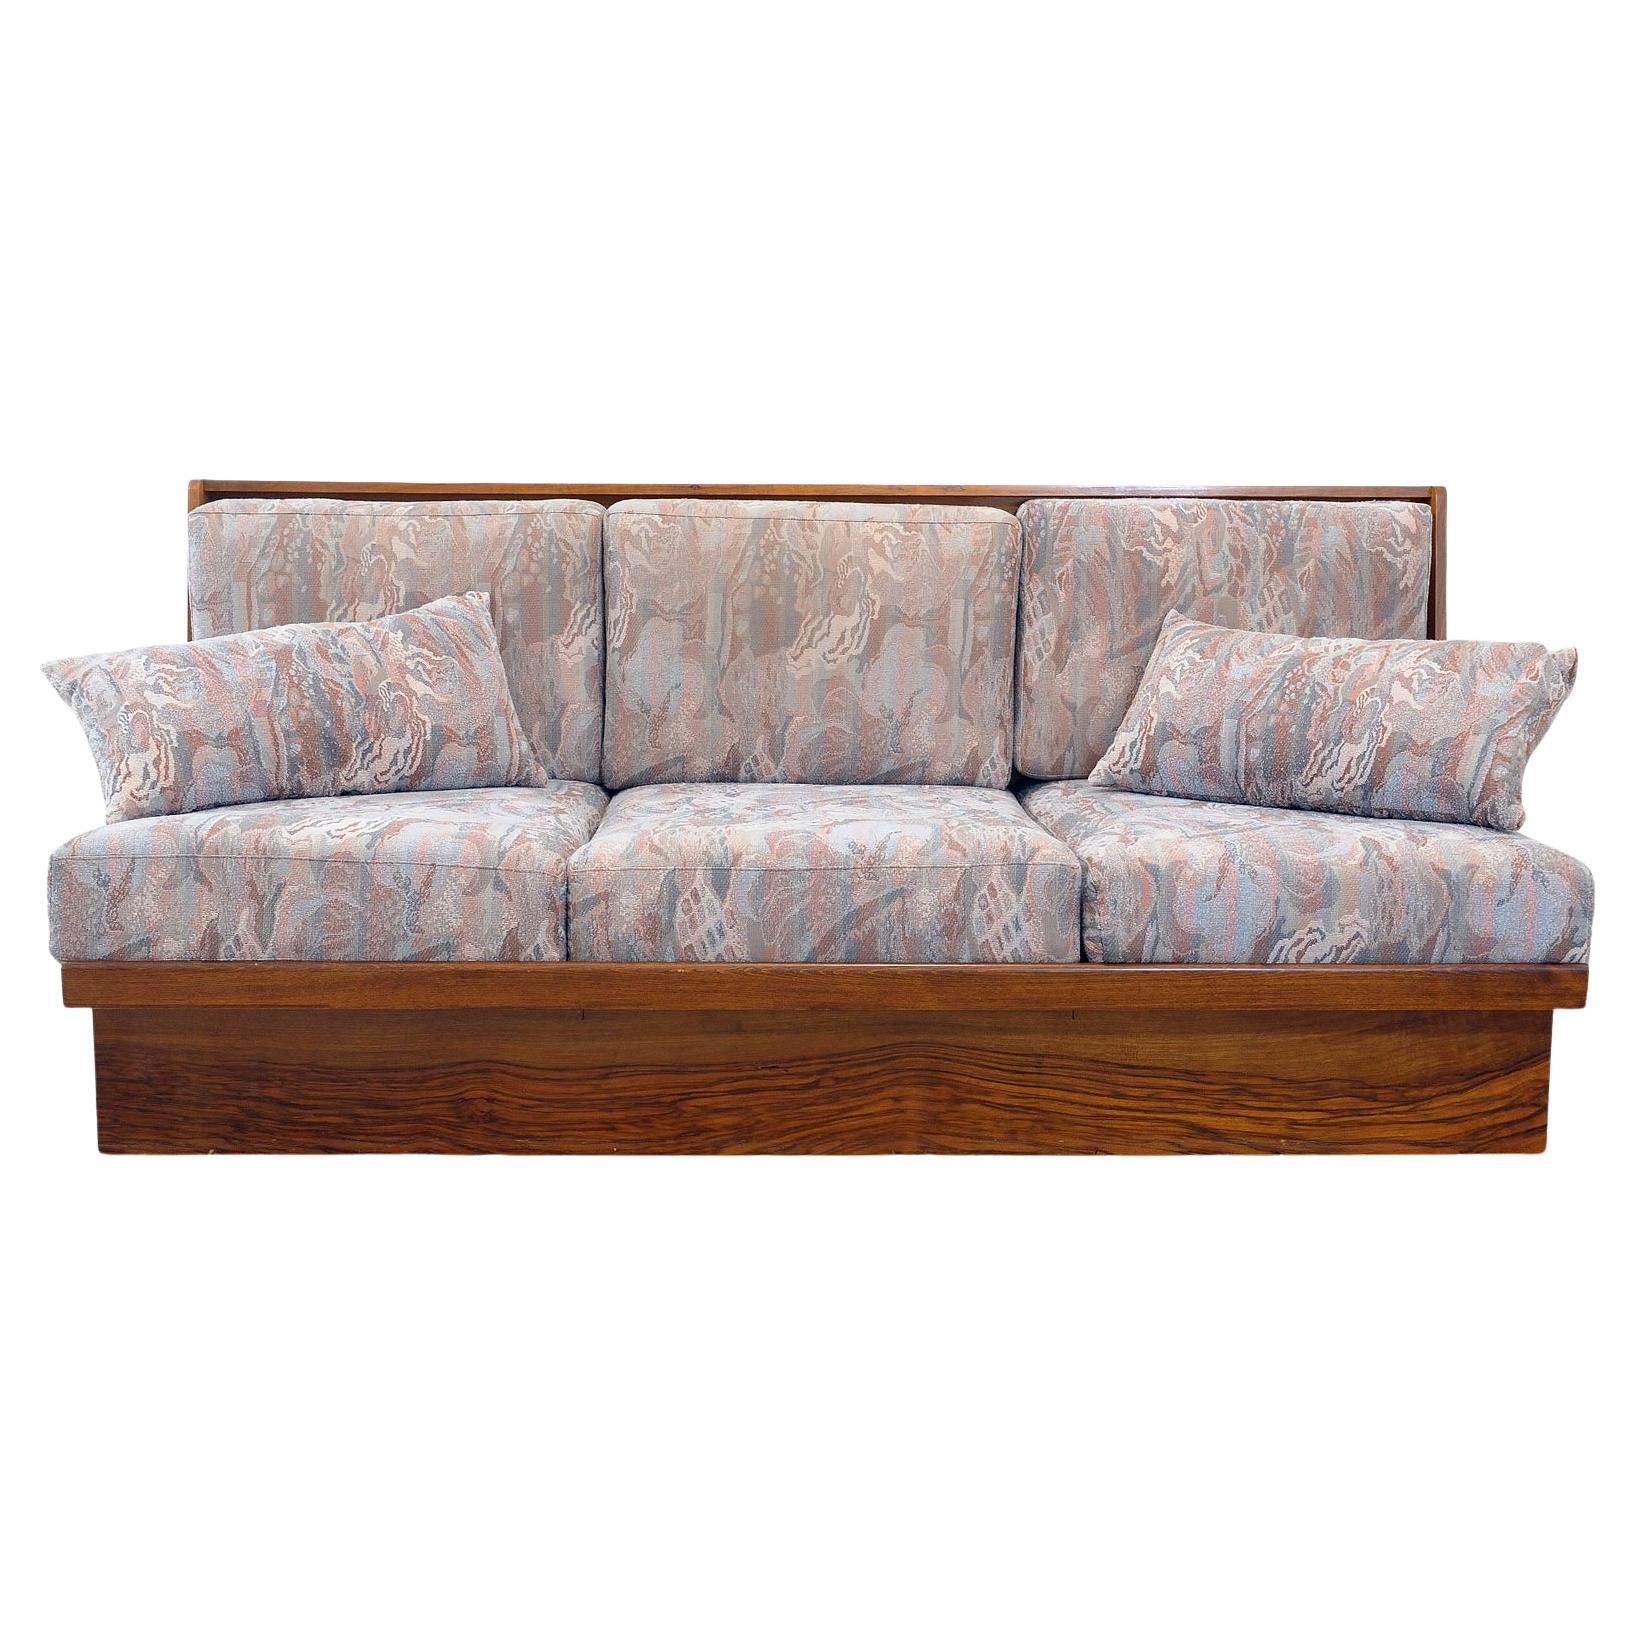 Midcentury folding sofabed, made in the former Czechoslovakia in 1958.

This sofa features a wooden structure that is veneered in walnut. The sofa is in very good vintage condition, showing slight signs of age and using.

Šířka